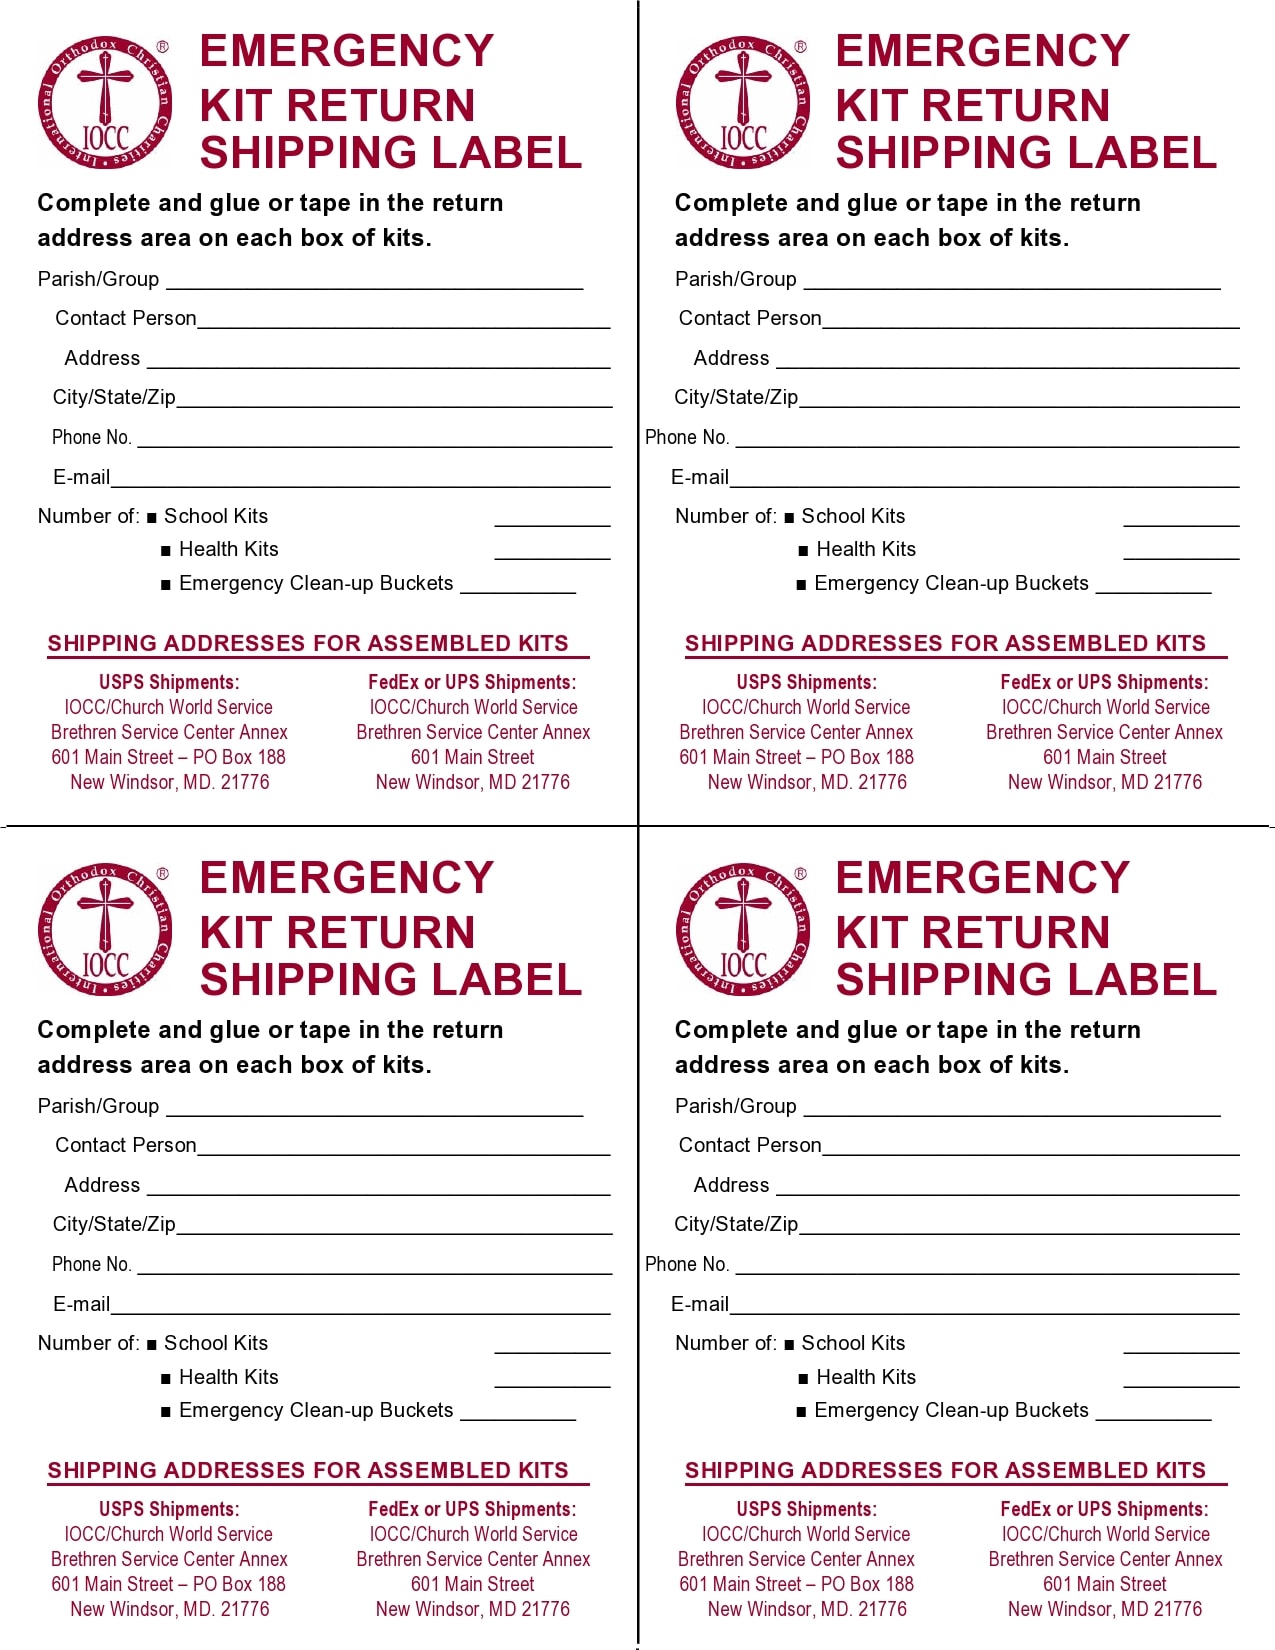 20 Printable Shipping Label Templates (Free) - PrintableTemplates Throughout Shipping Label Template Online